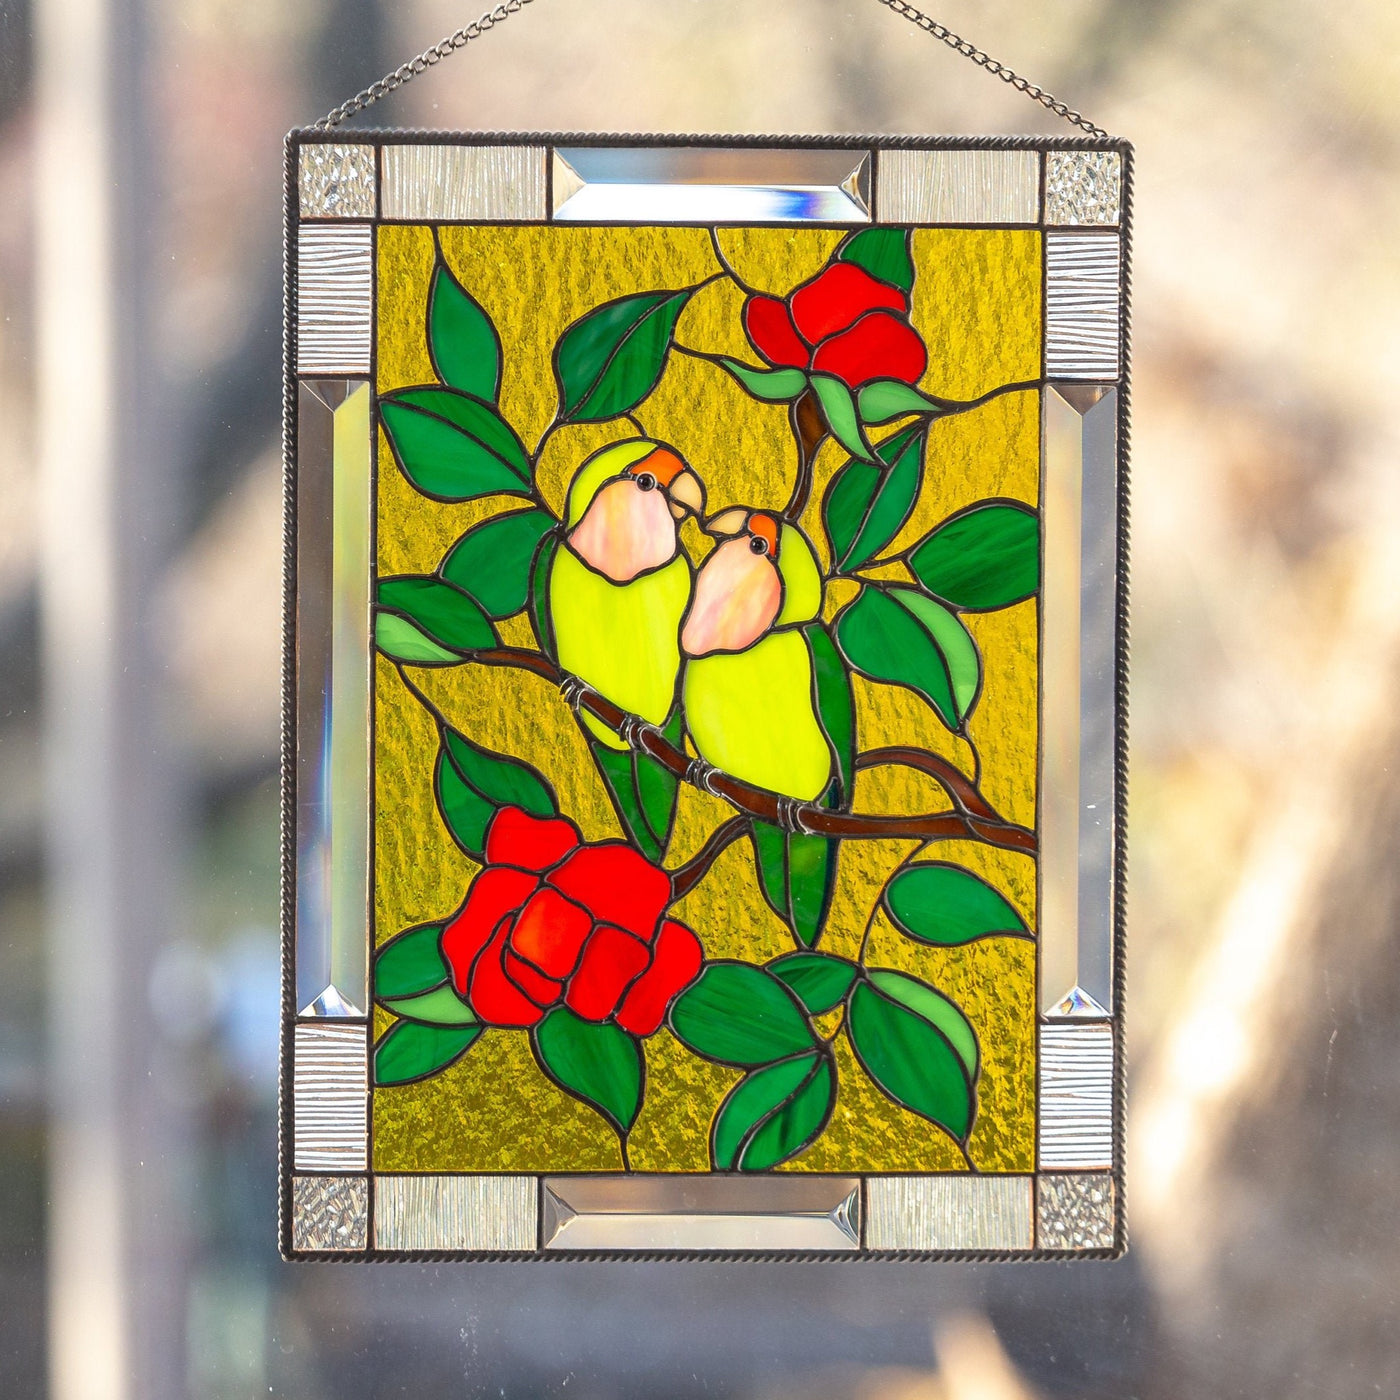 Stained glass panel depicting lovebirds sitting on the branch with flowers